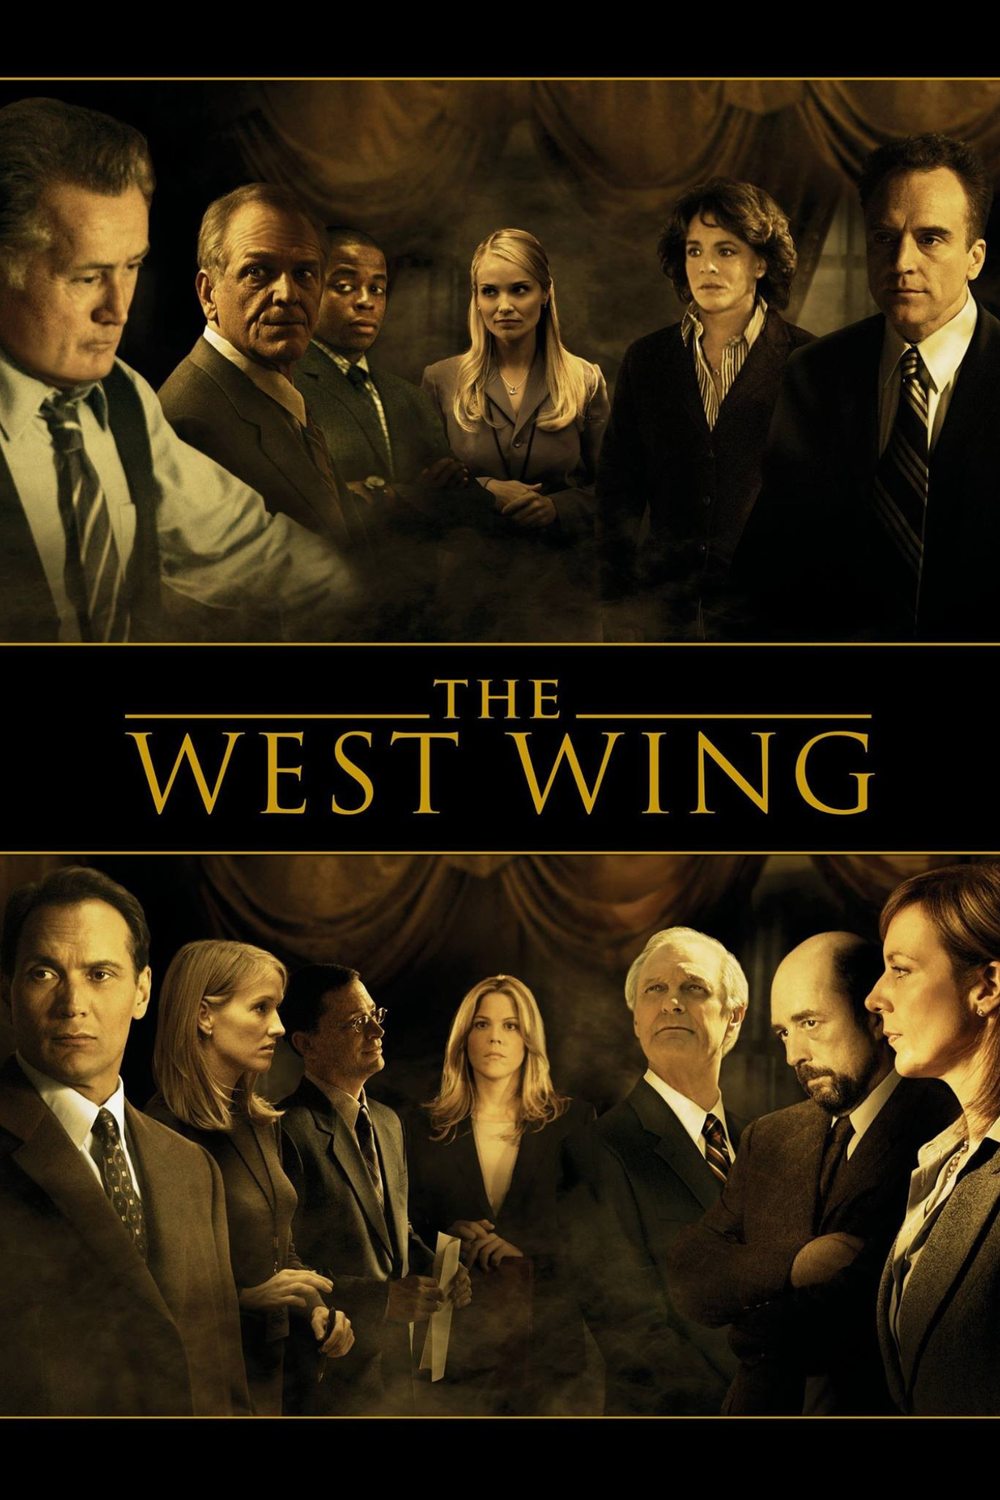 Aaron Sorkin, The West Wing Poster.png